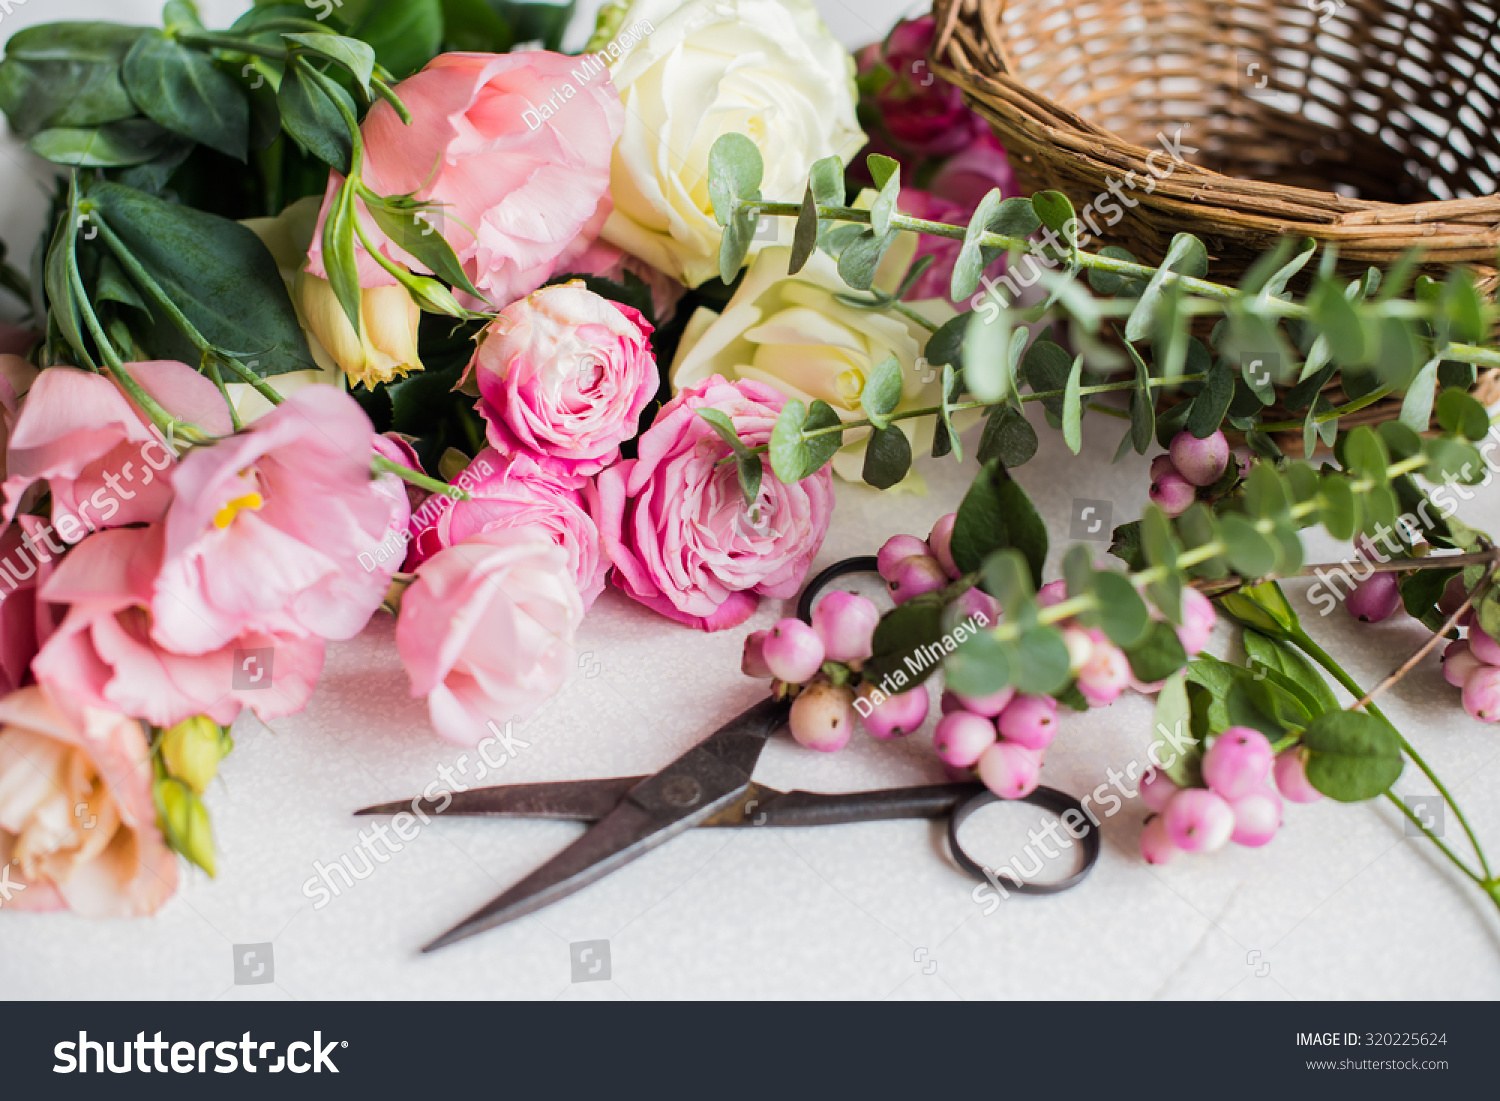 Fresh flowers, leaves, and tools to create a bouquet on a table, florist's workplace. #320225624